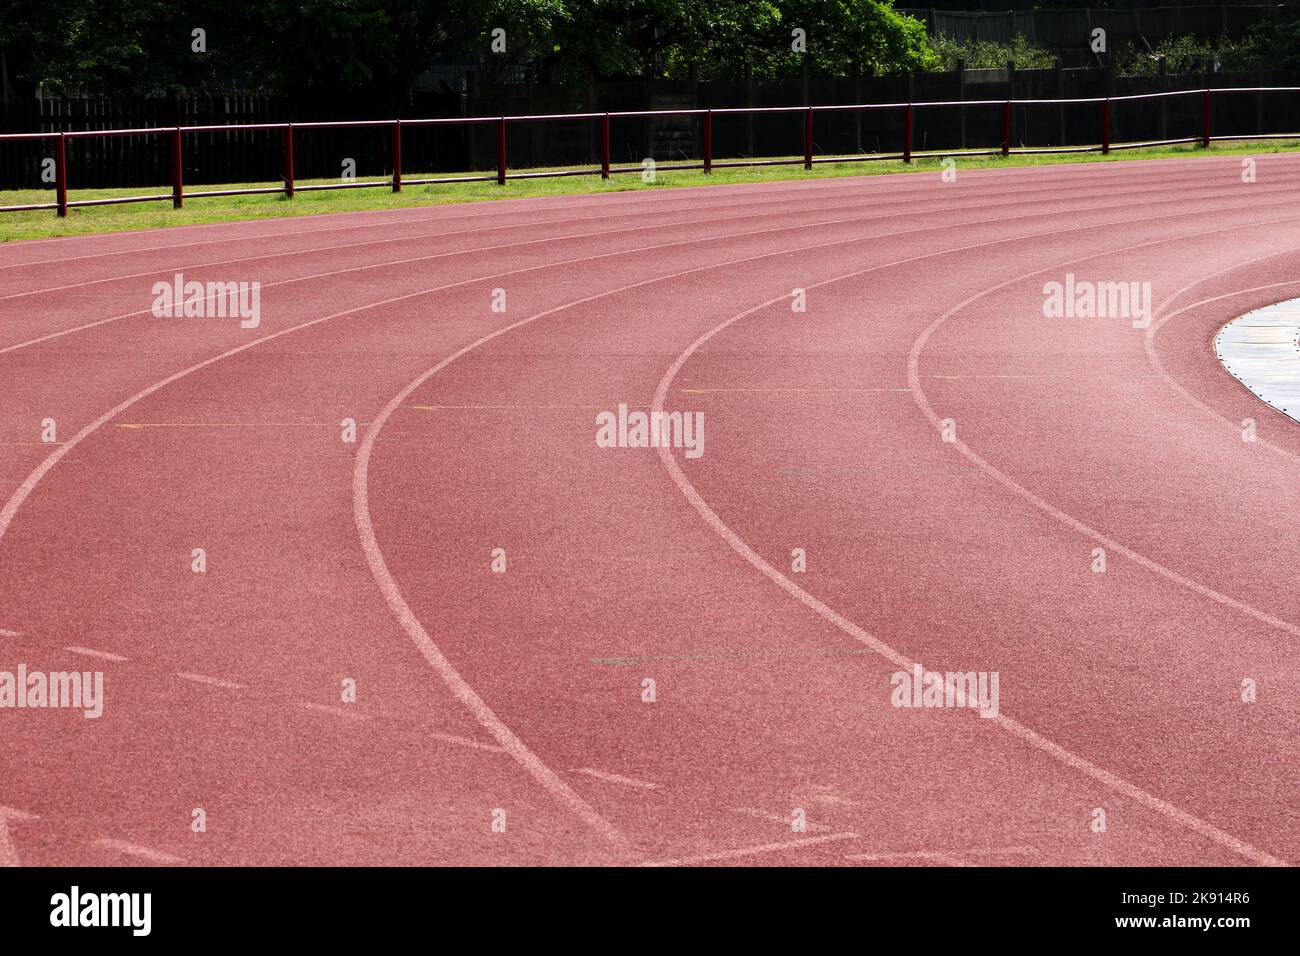 White lines forming lanes of an athletics track made of red rubber Stock Photo